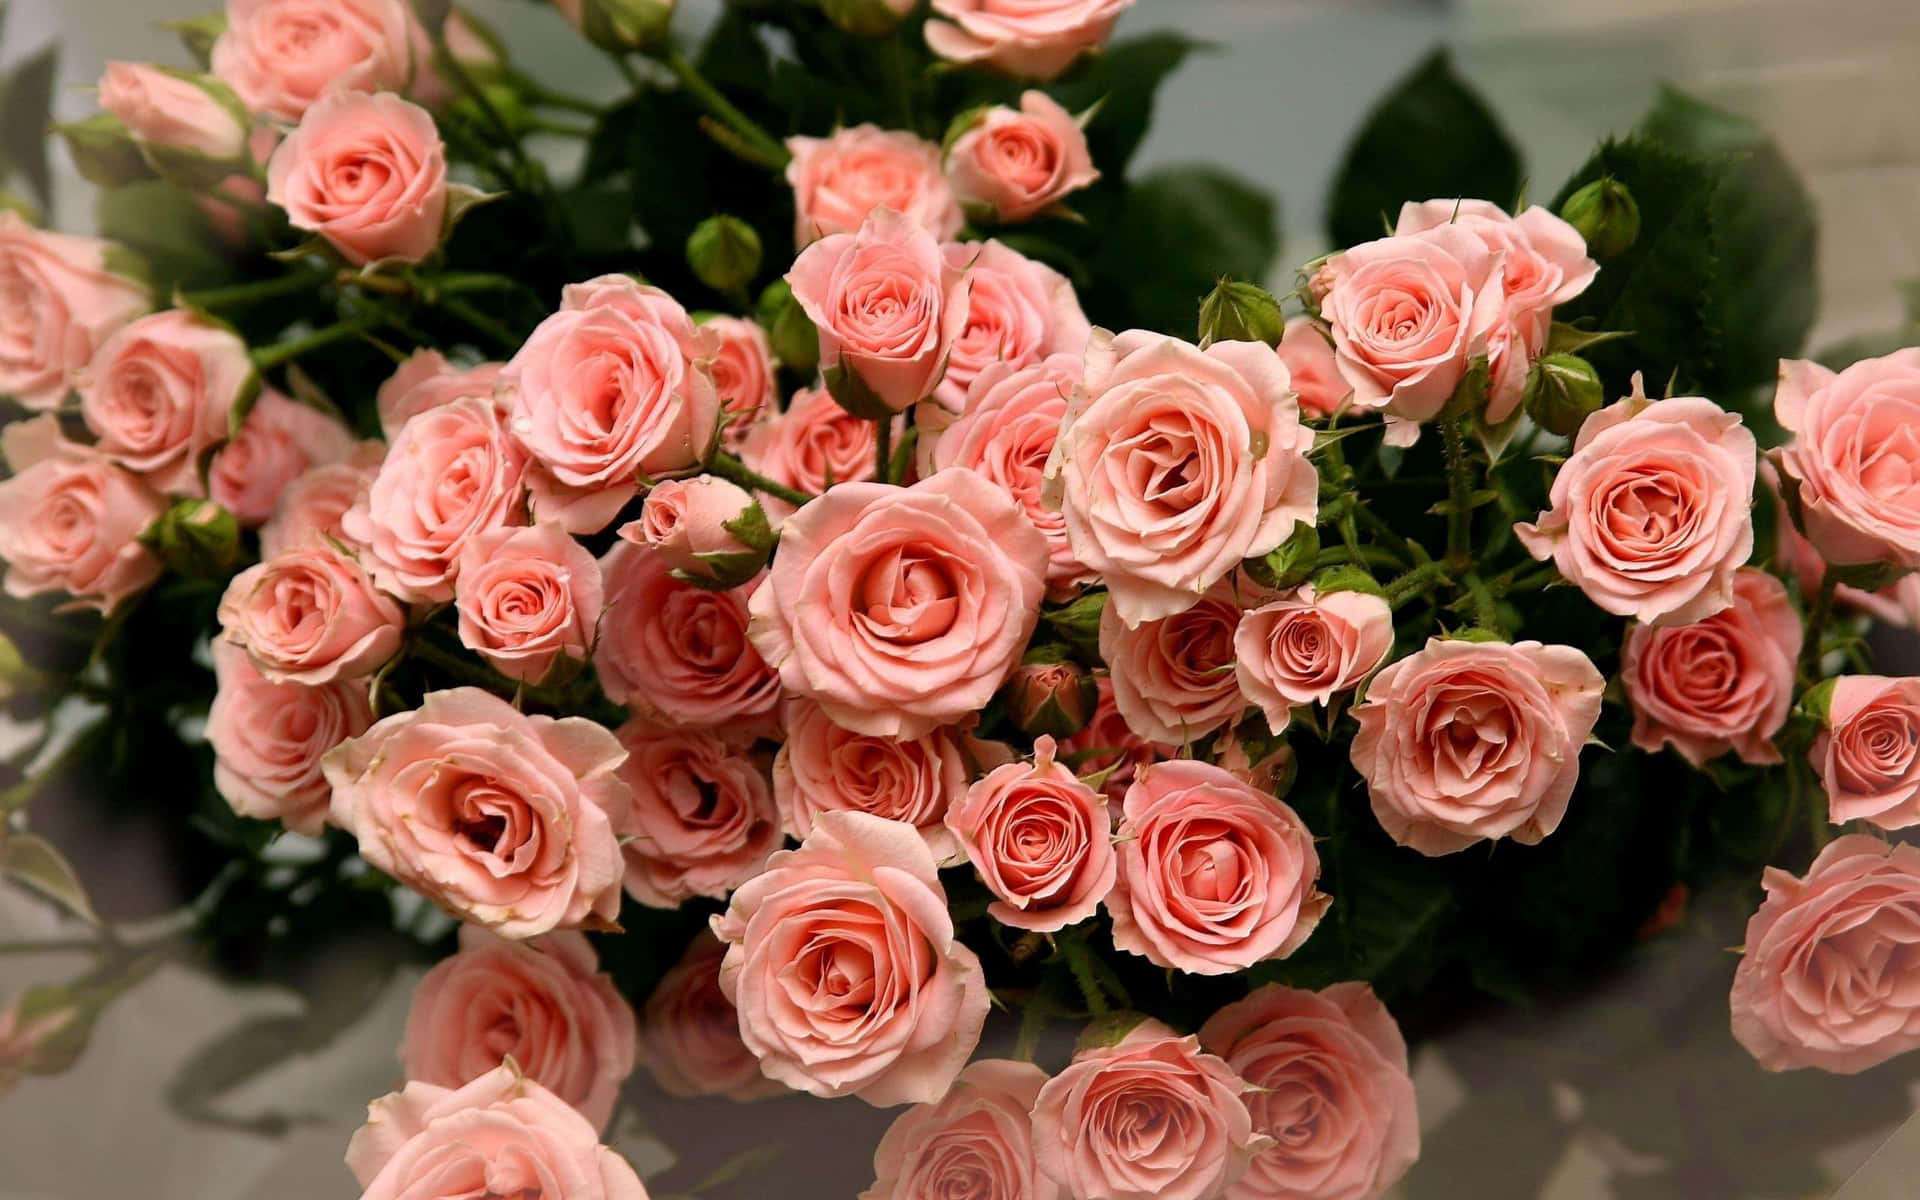 A Beautiful Bouquet of Fragrant Pink Roses